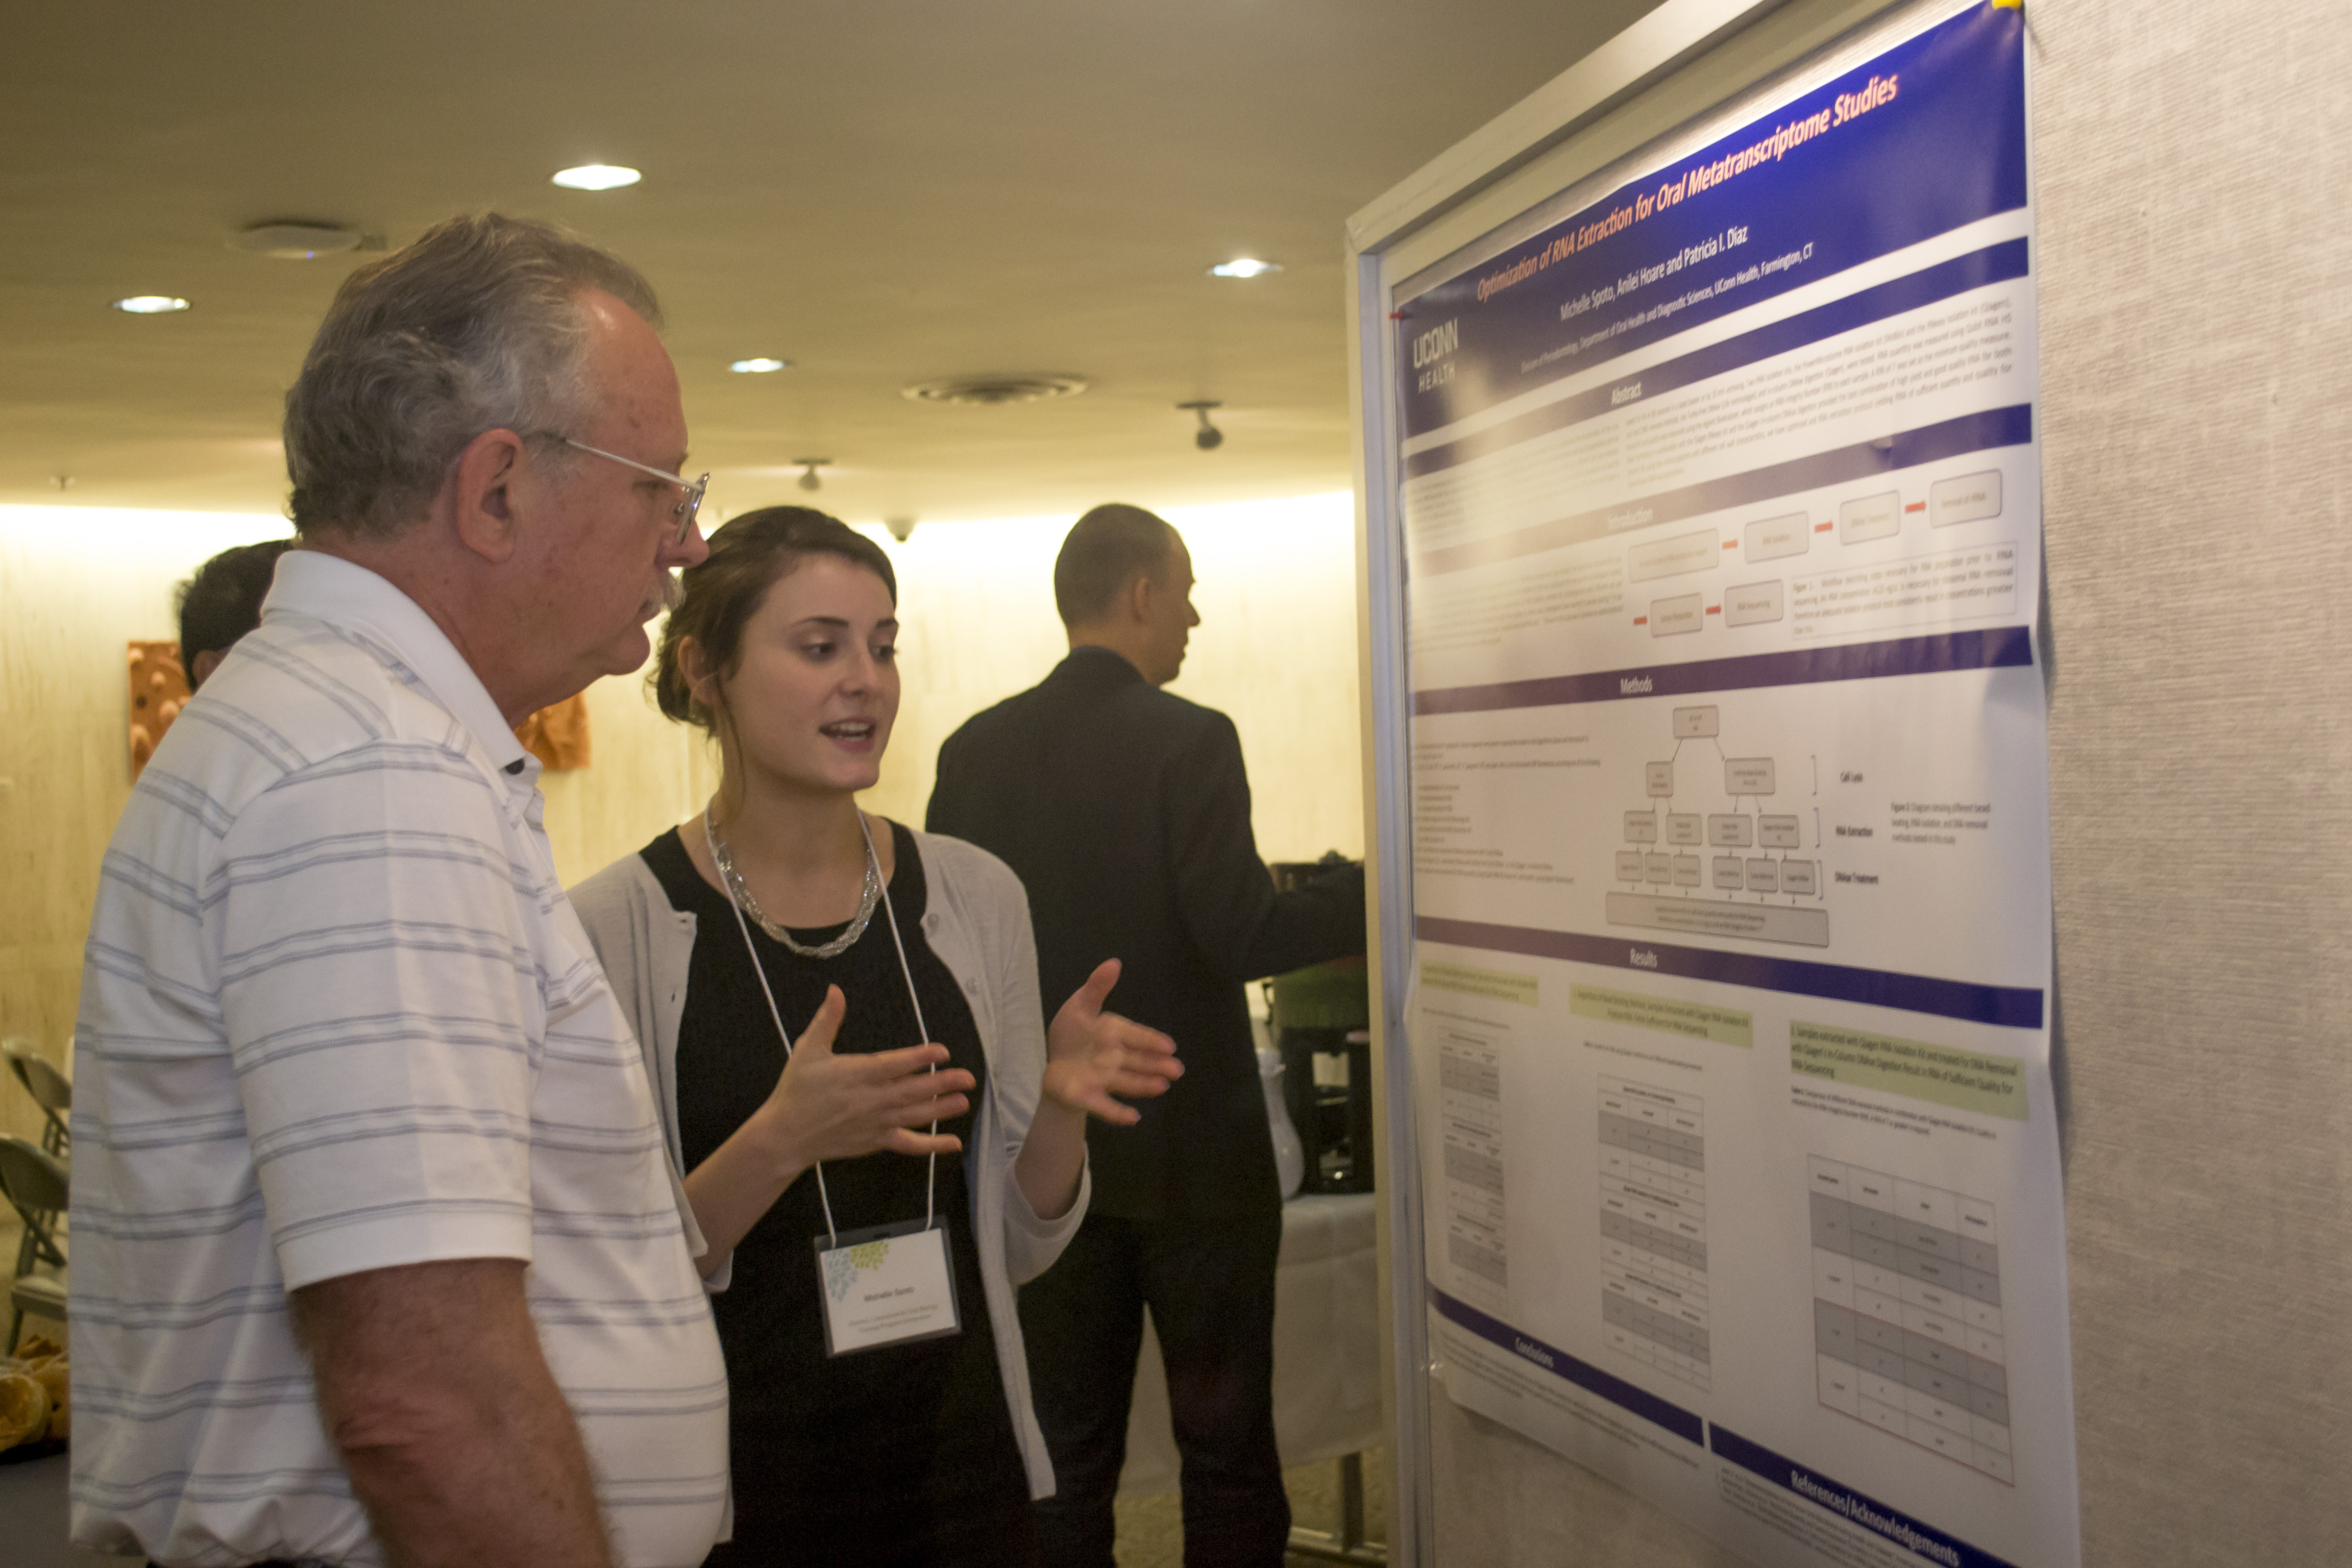 PhD student Michelle Spoto explaining her research poster to reconstructive sciences researcher Alex Lichtler during the Skeletal, Craniofacial and Oral Biology annual symposium Monday at UConn Health. (Photo by Tina Encarnacion)